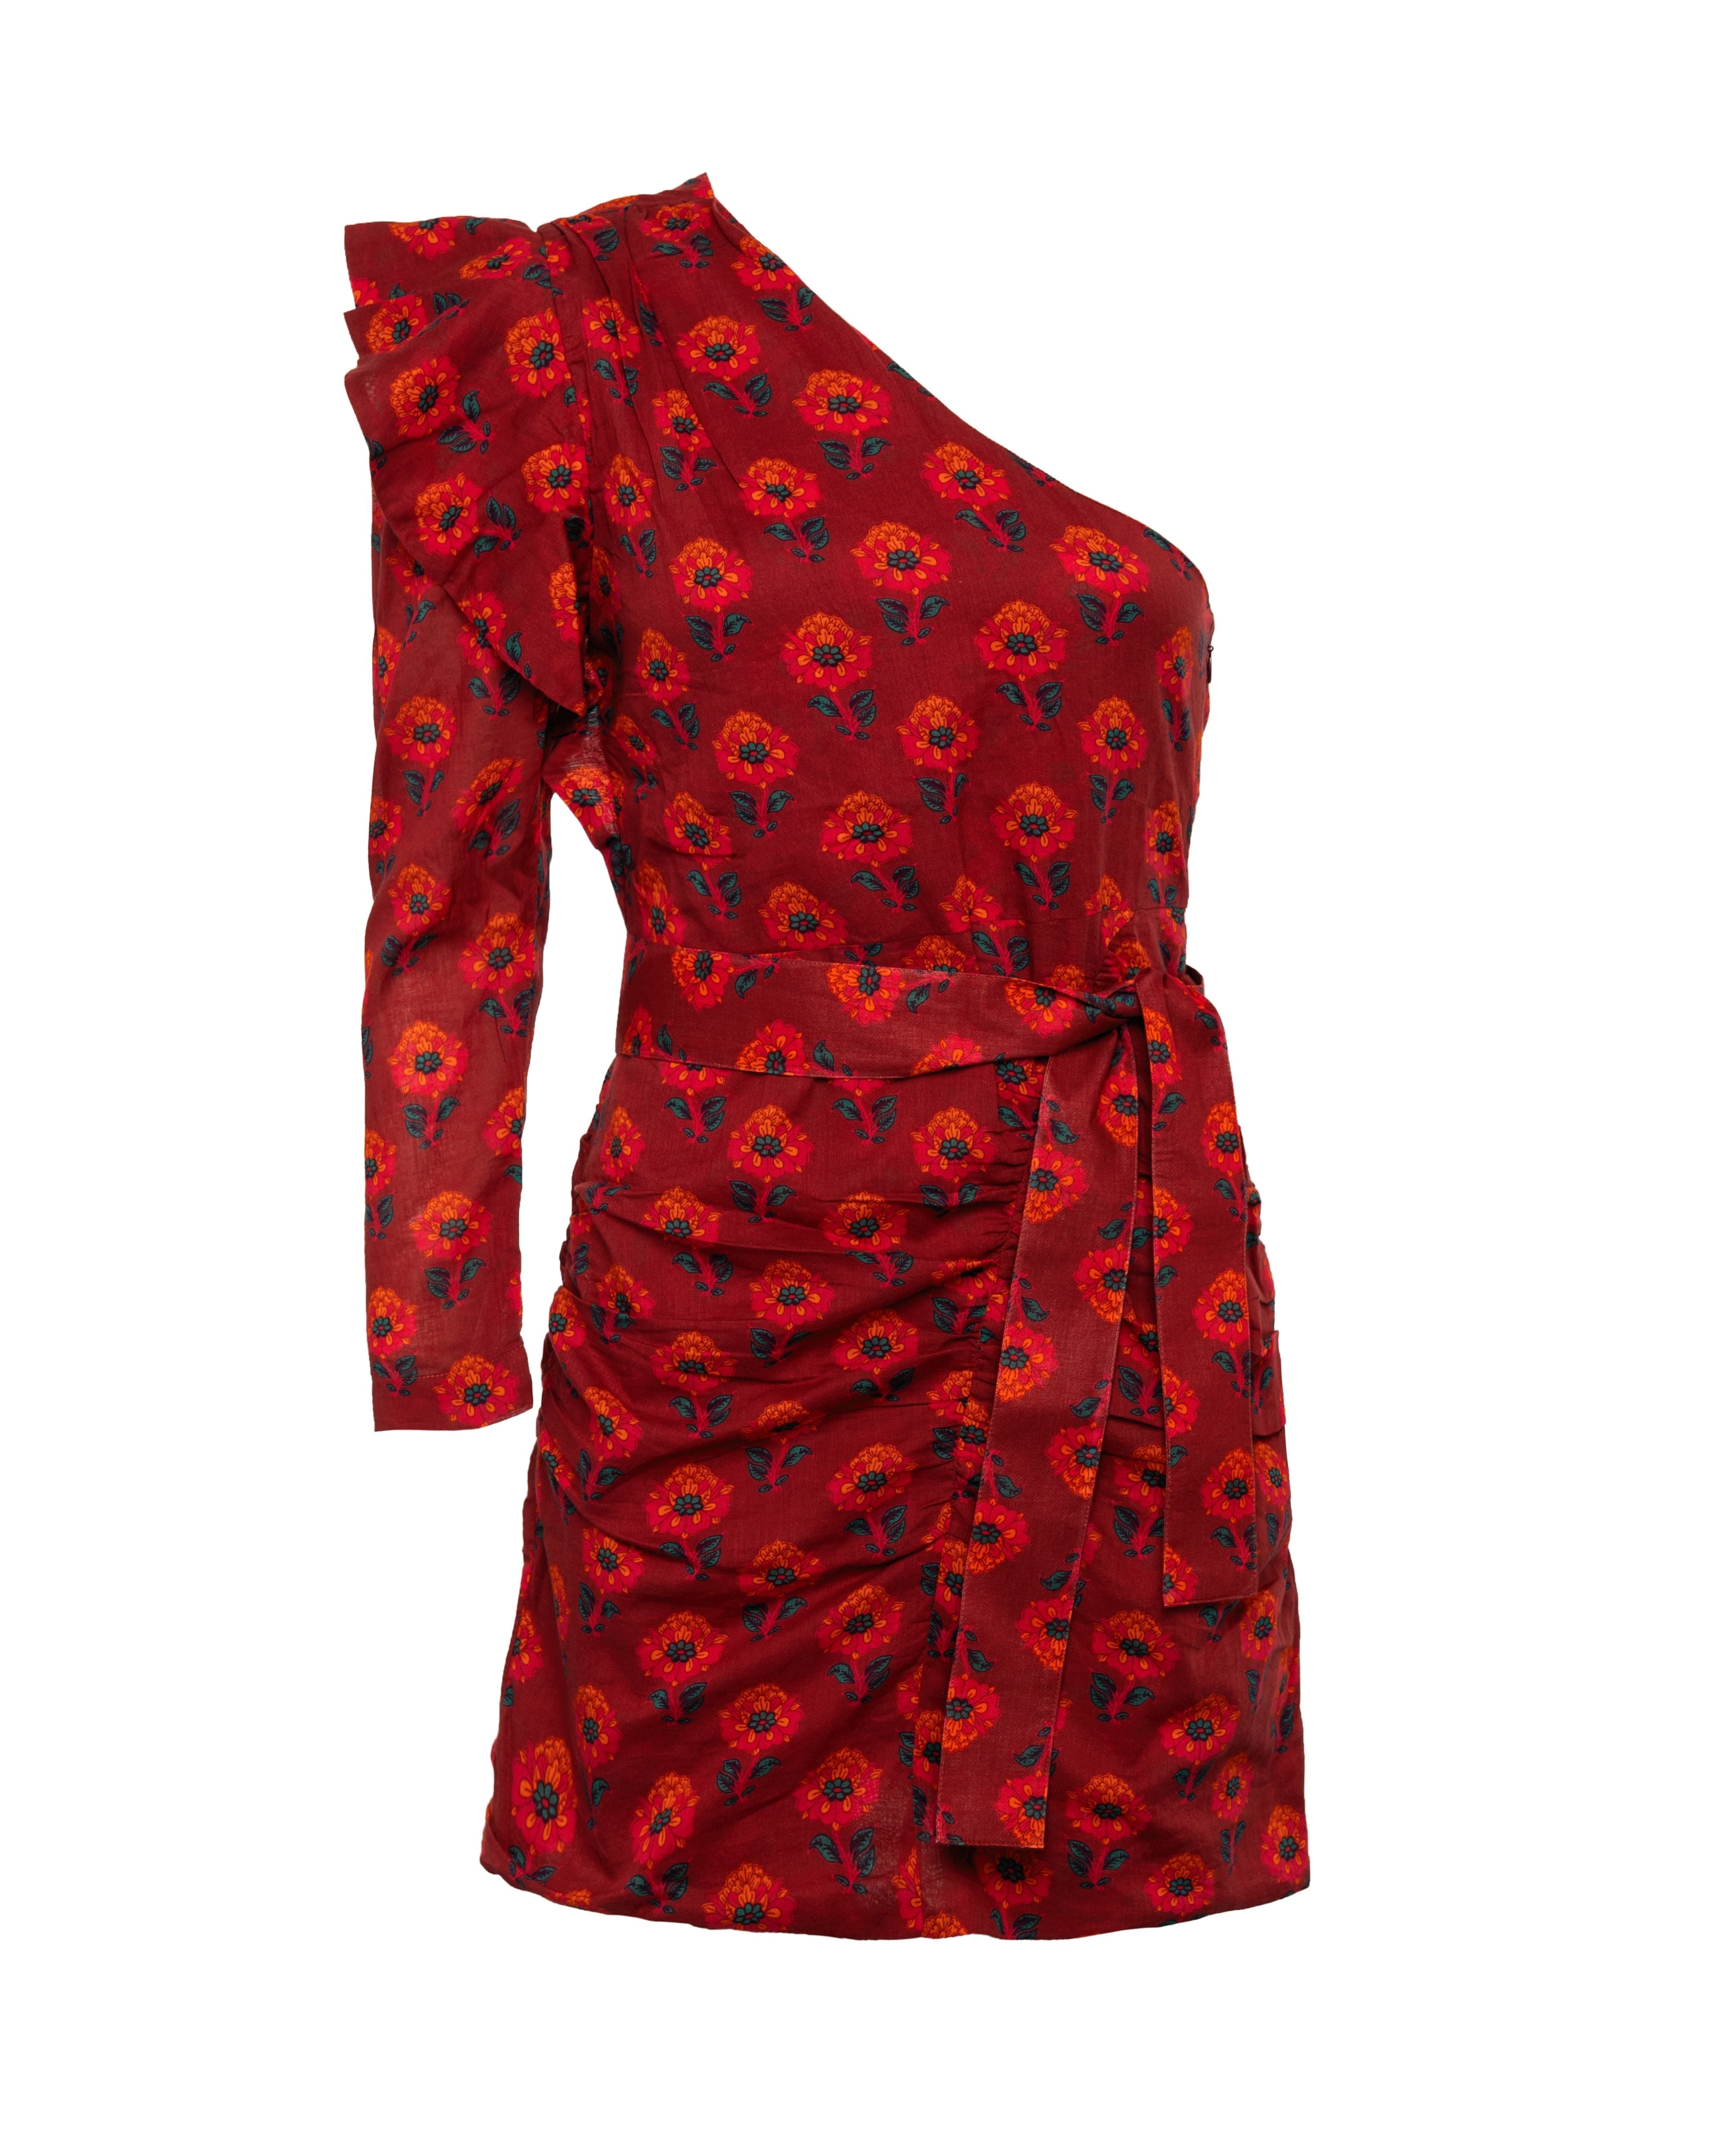 Adine Dress - Red Floral by Desert Queen